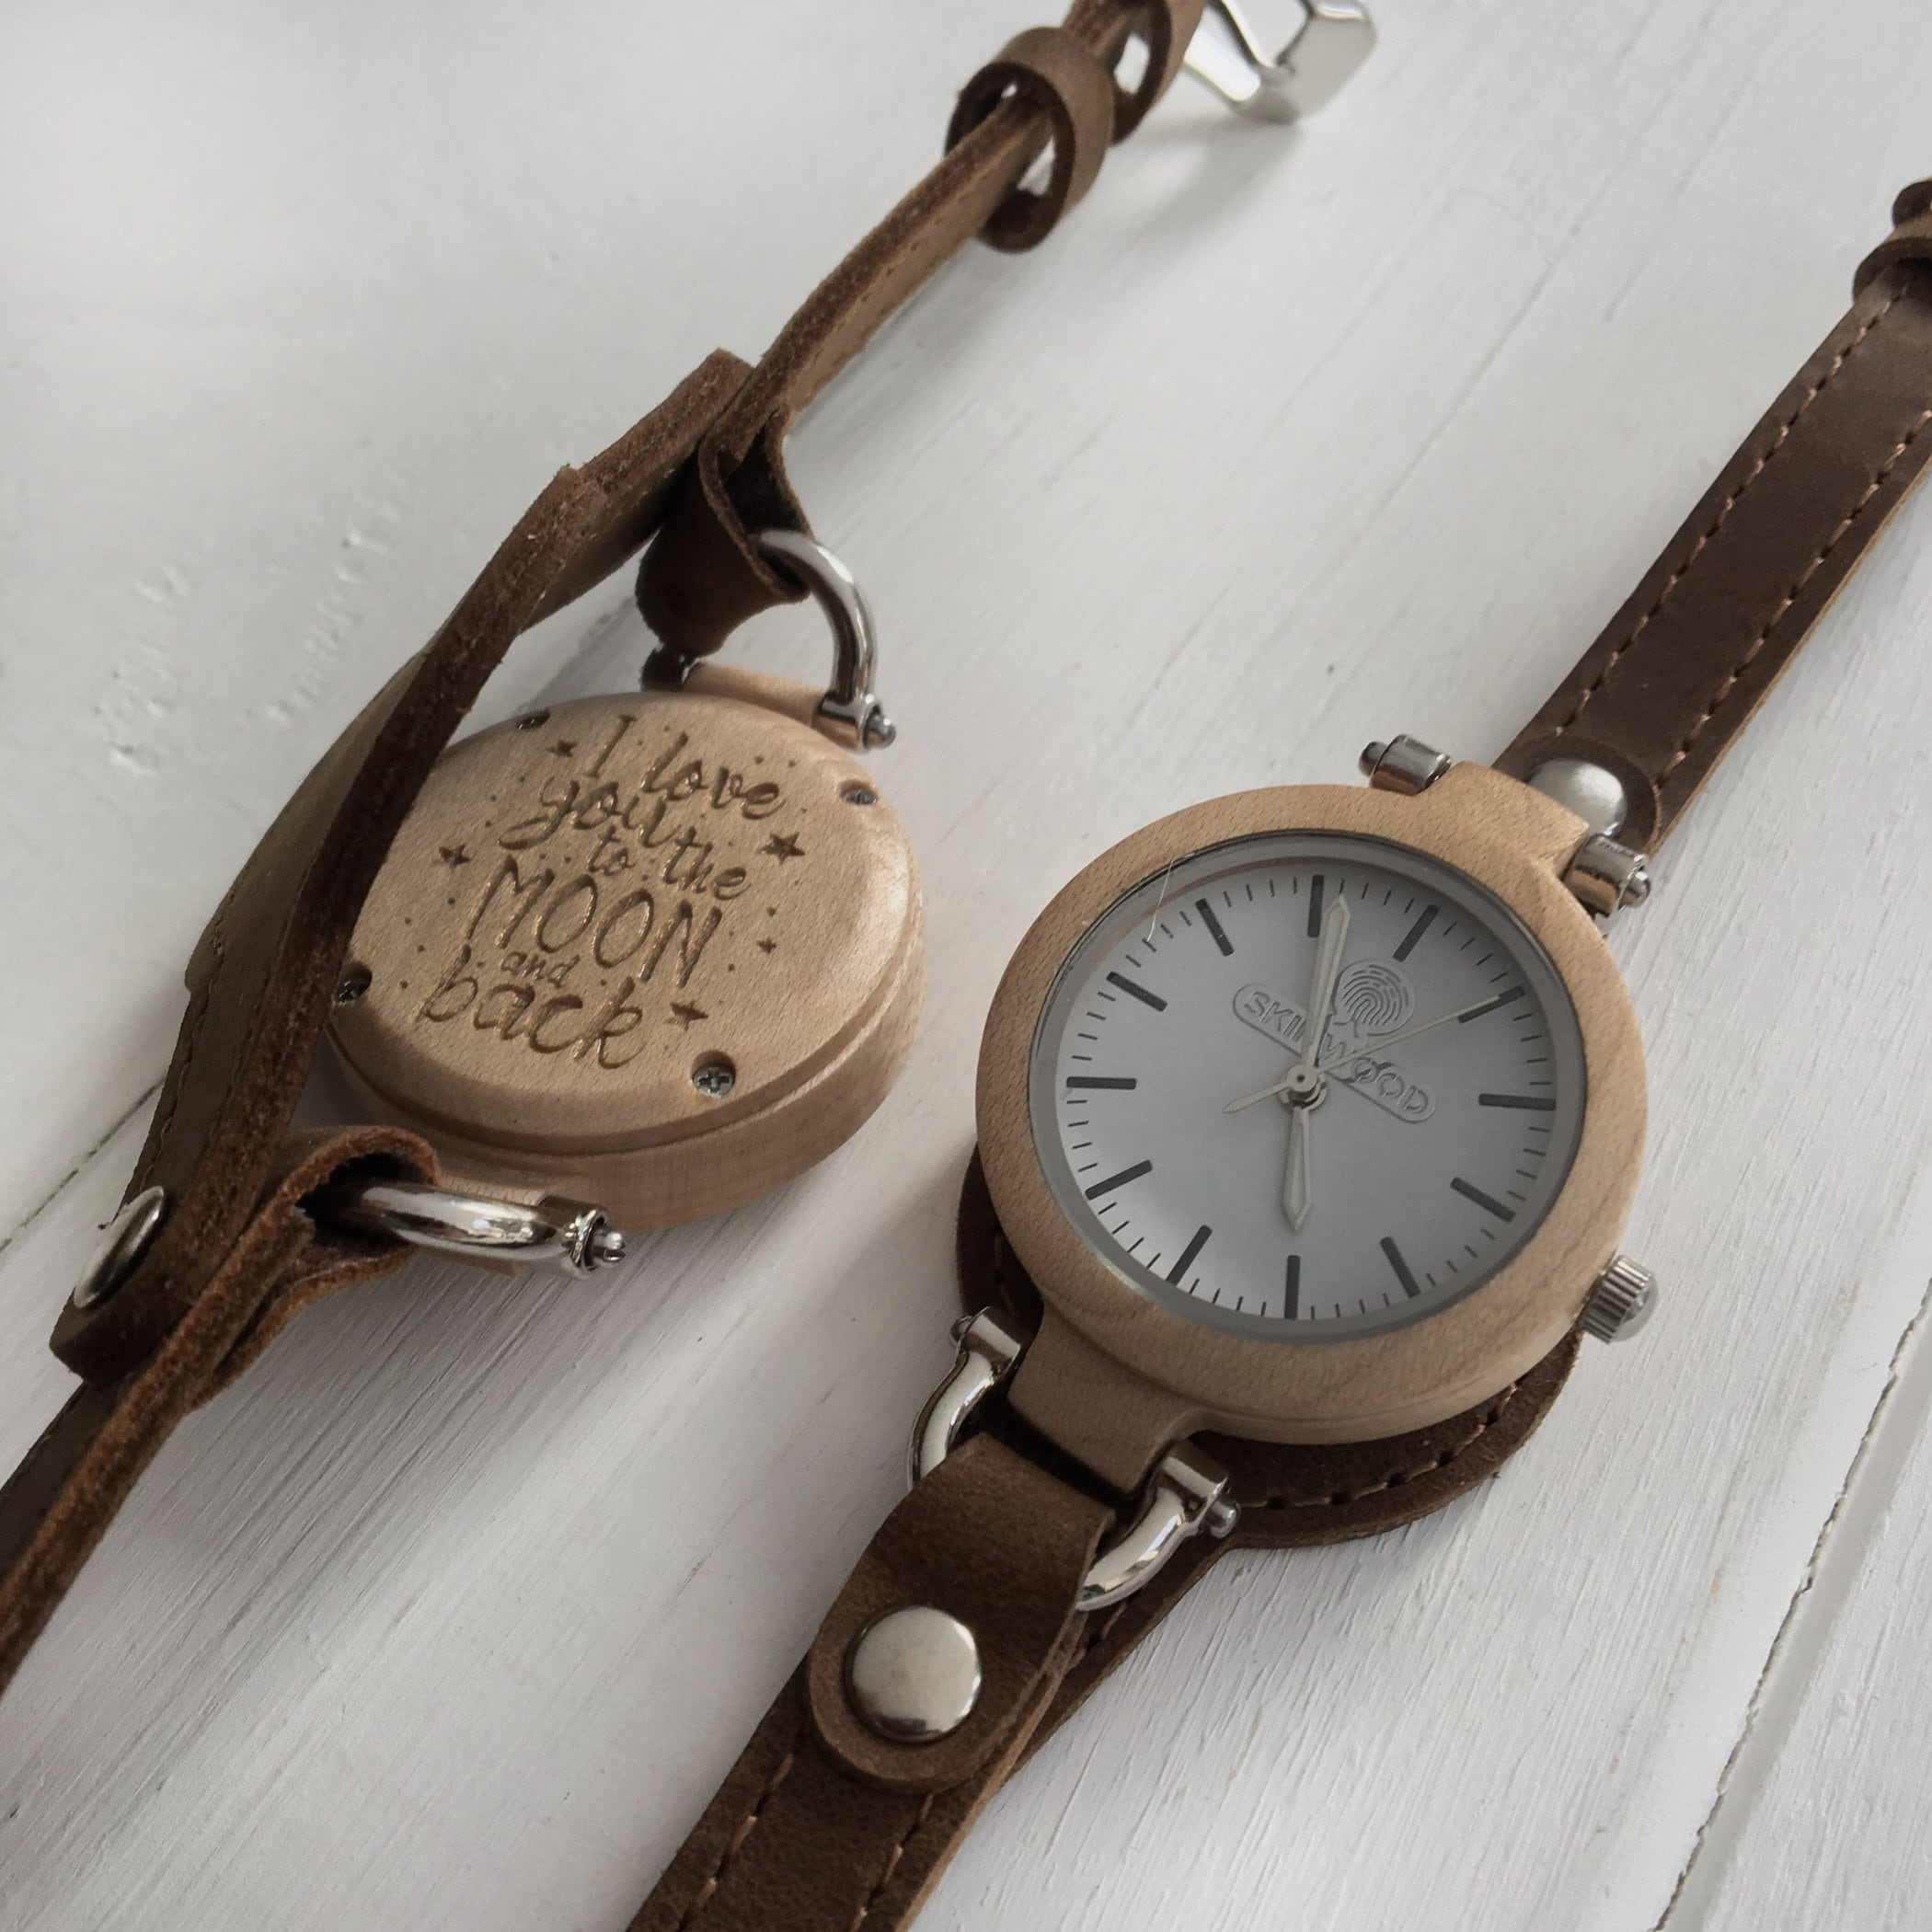 Wooden Watch Skinwood Lady Personalized engraving